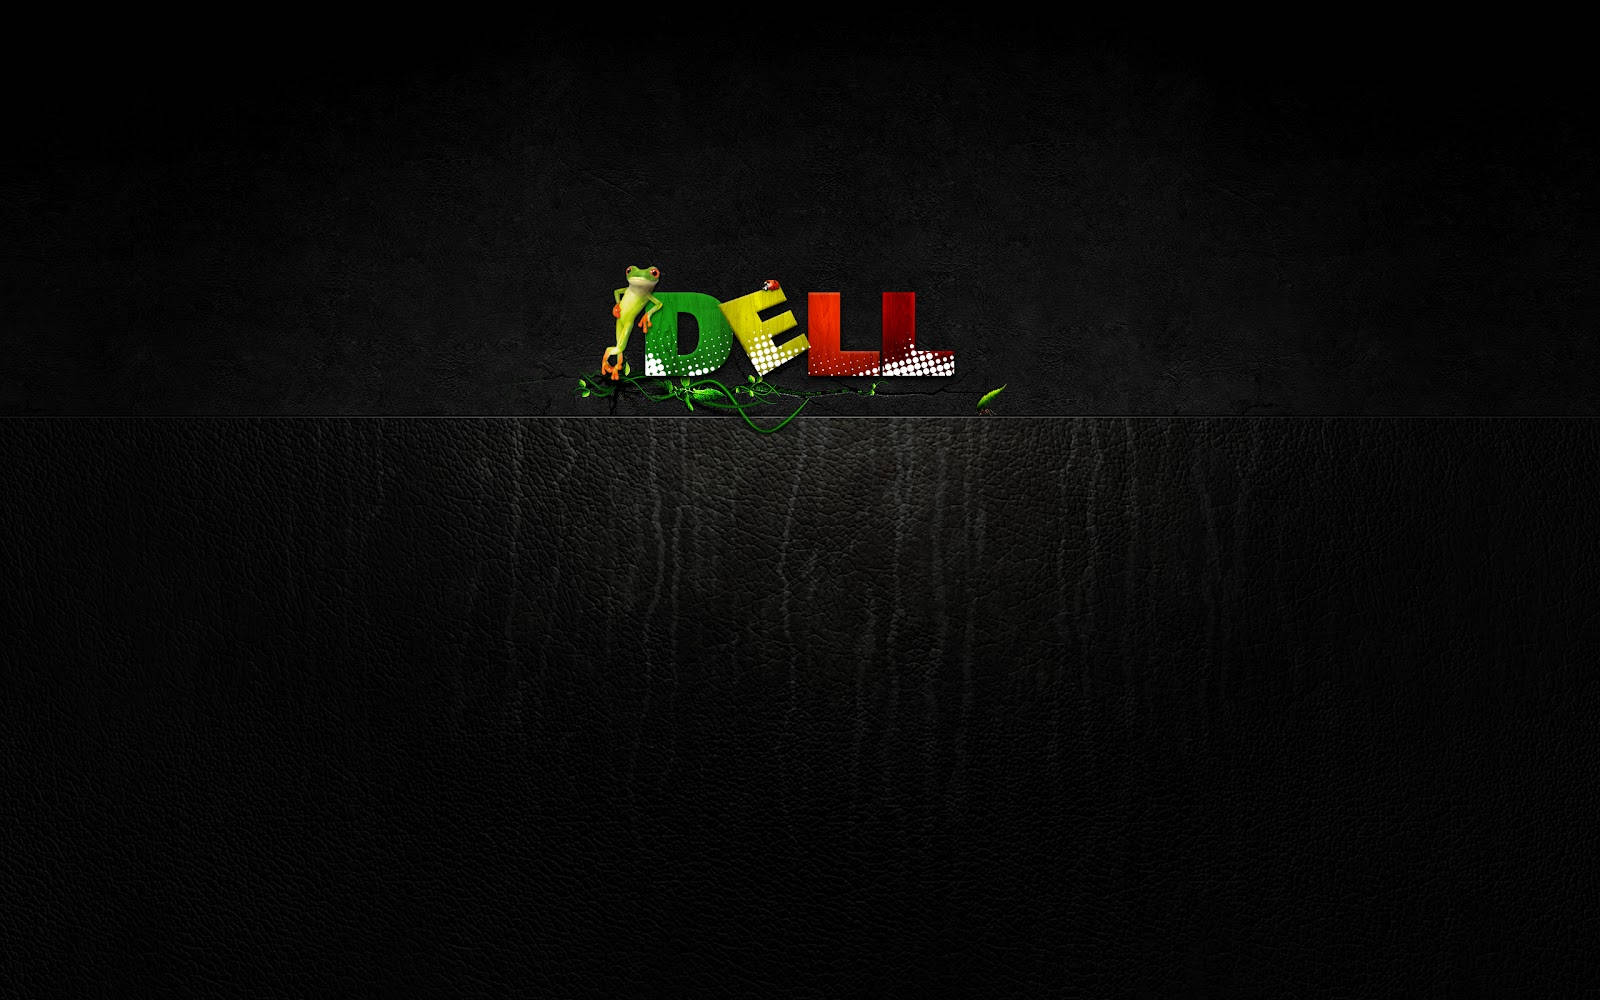 Dell Hd Logo With Frog Background